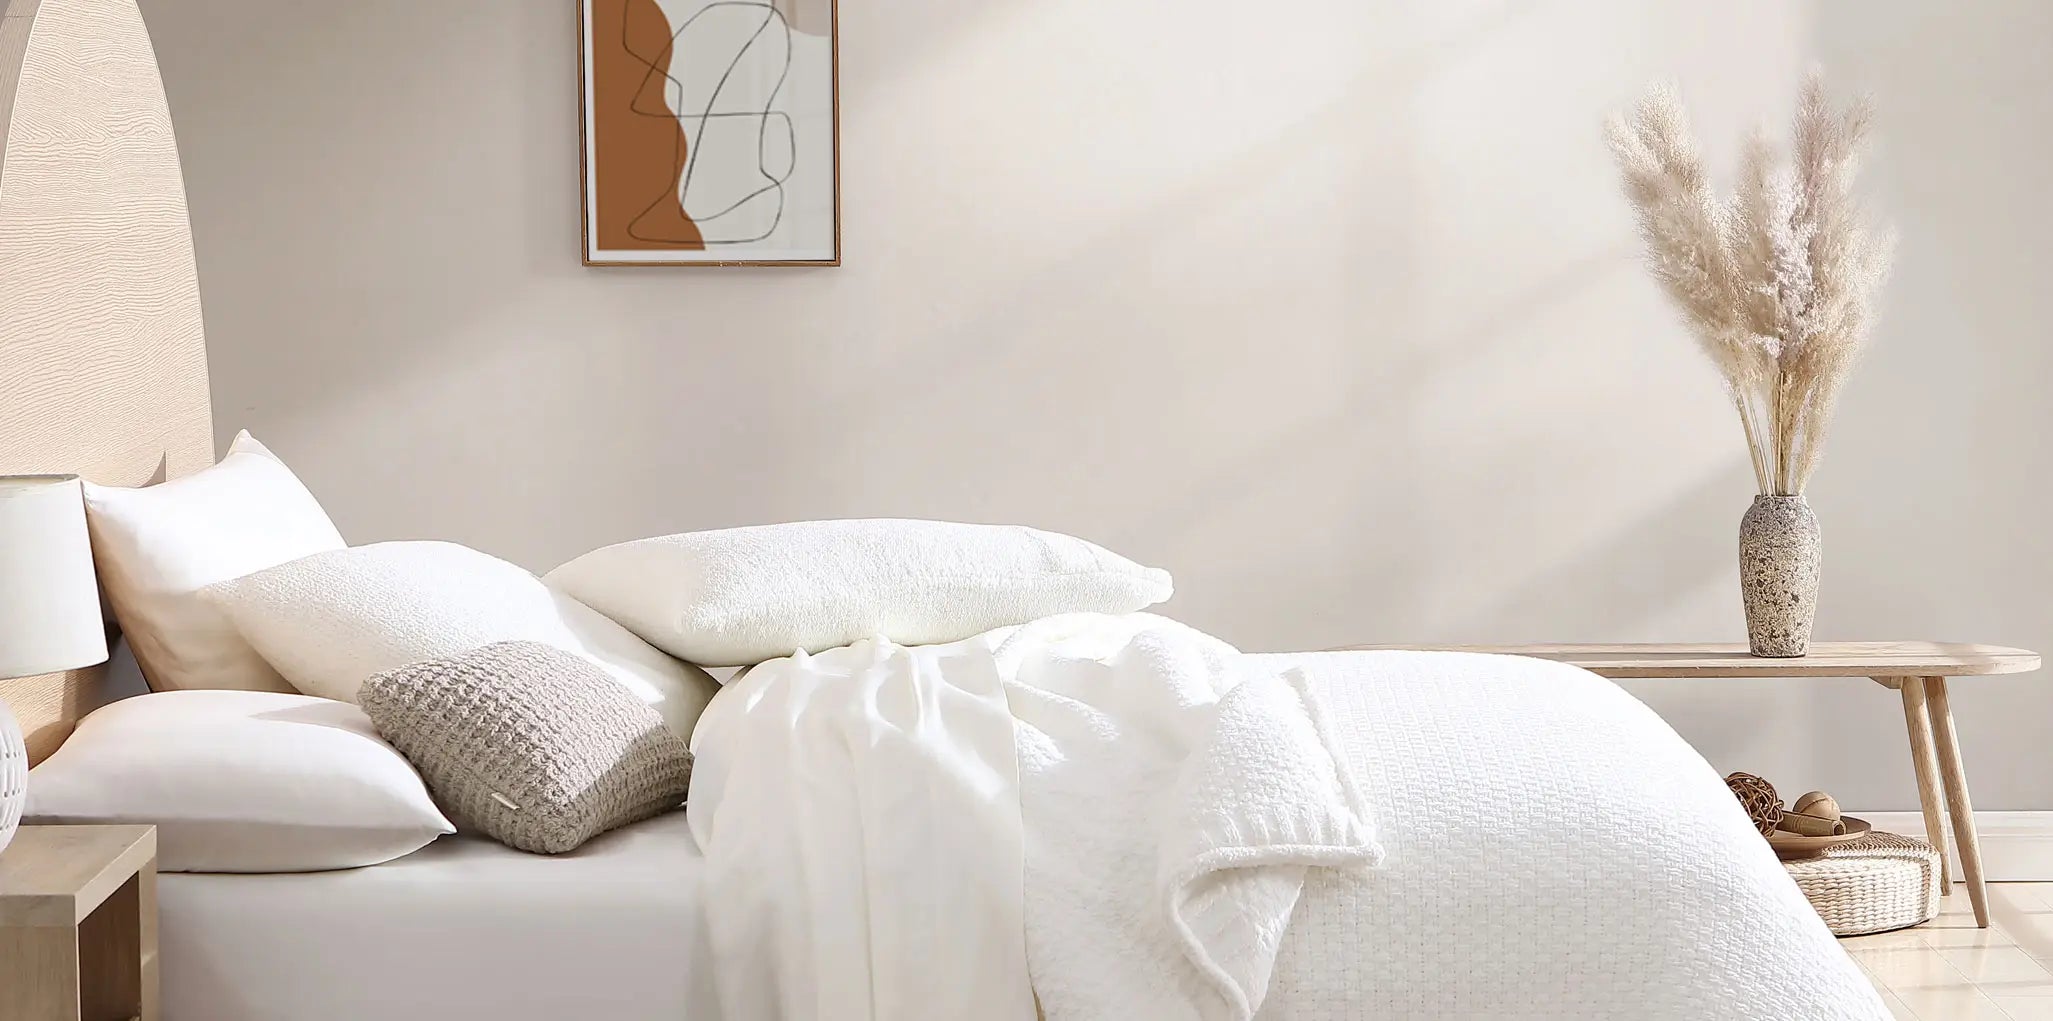 Bed Room Colors Beige Wall with White Comforter